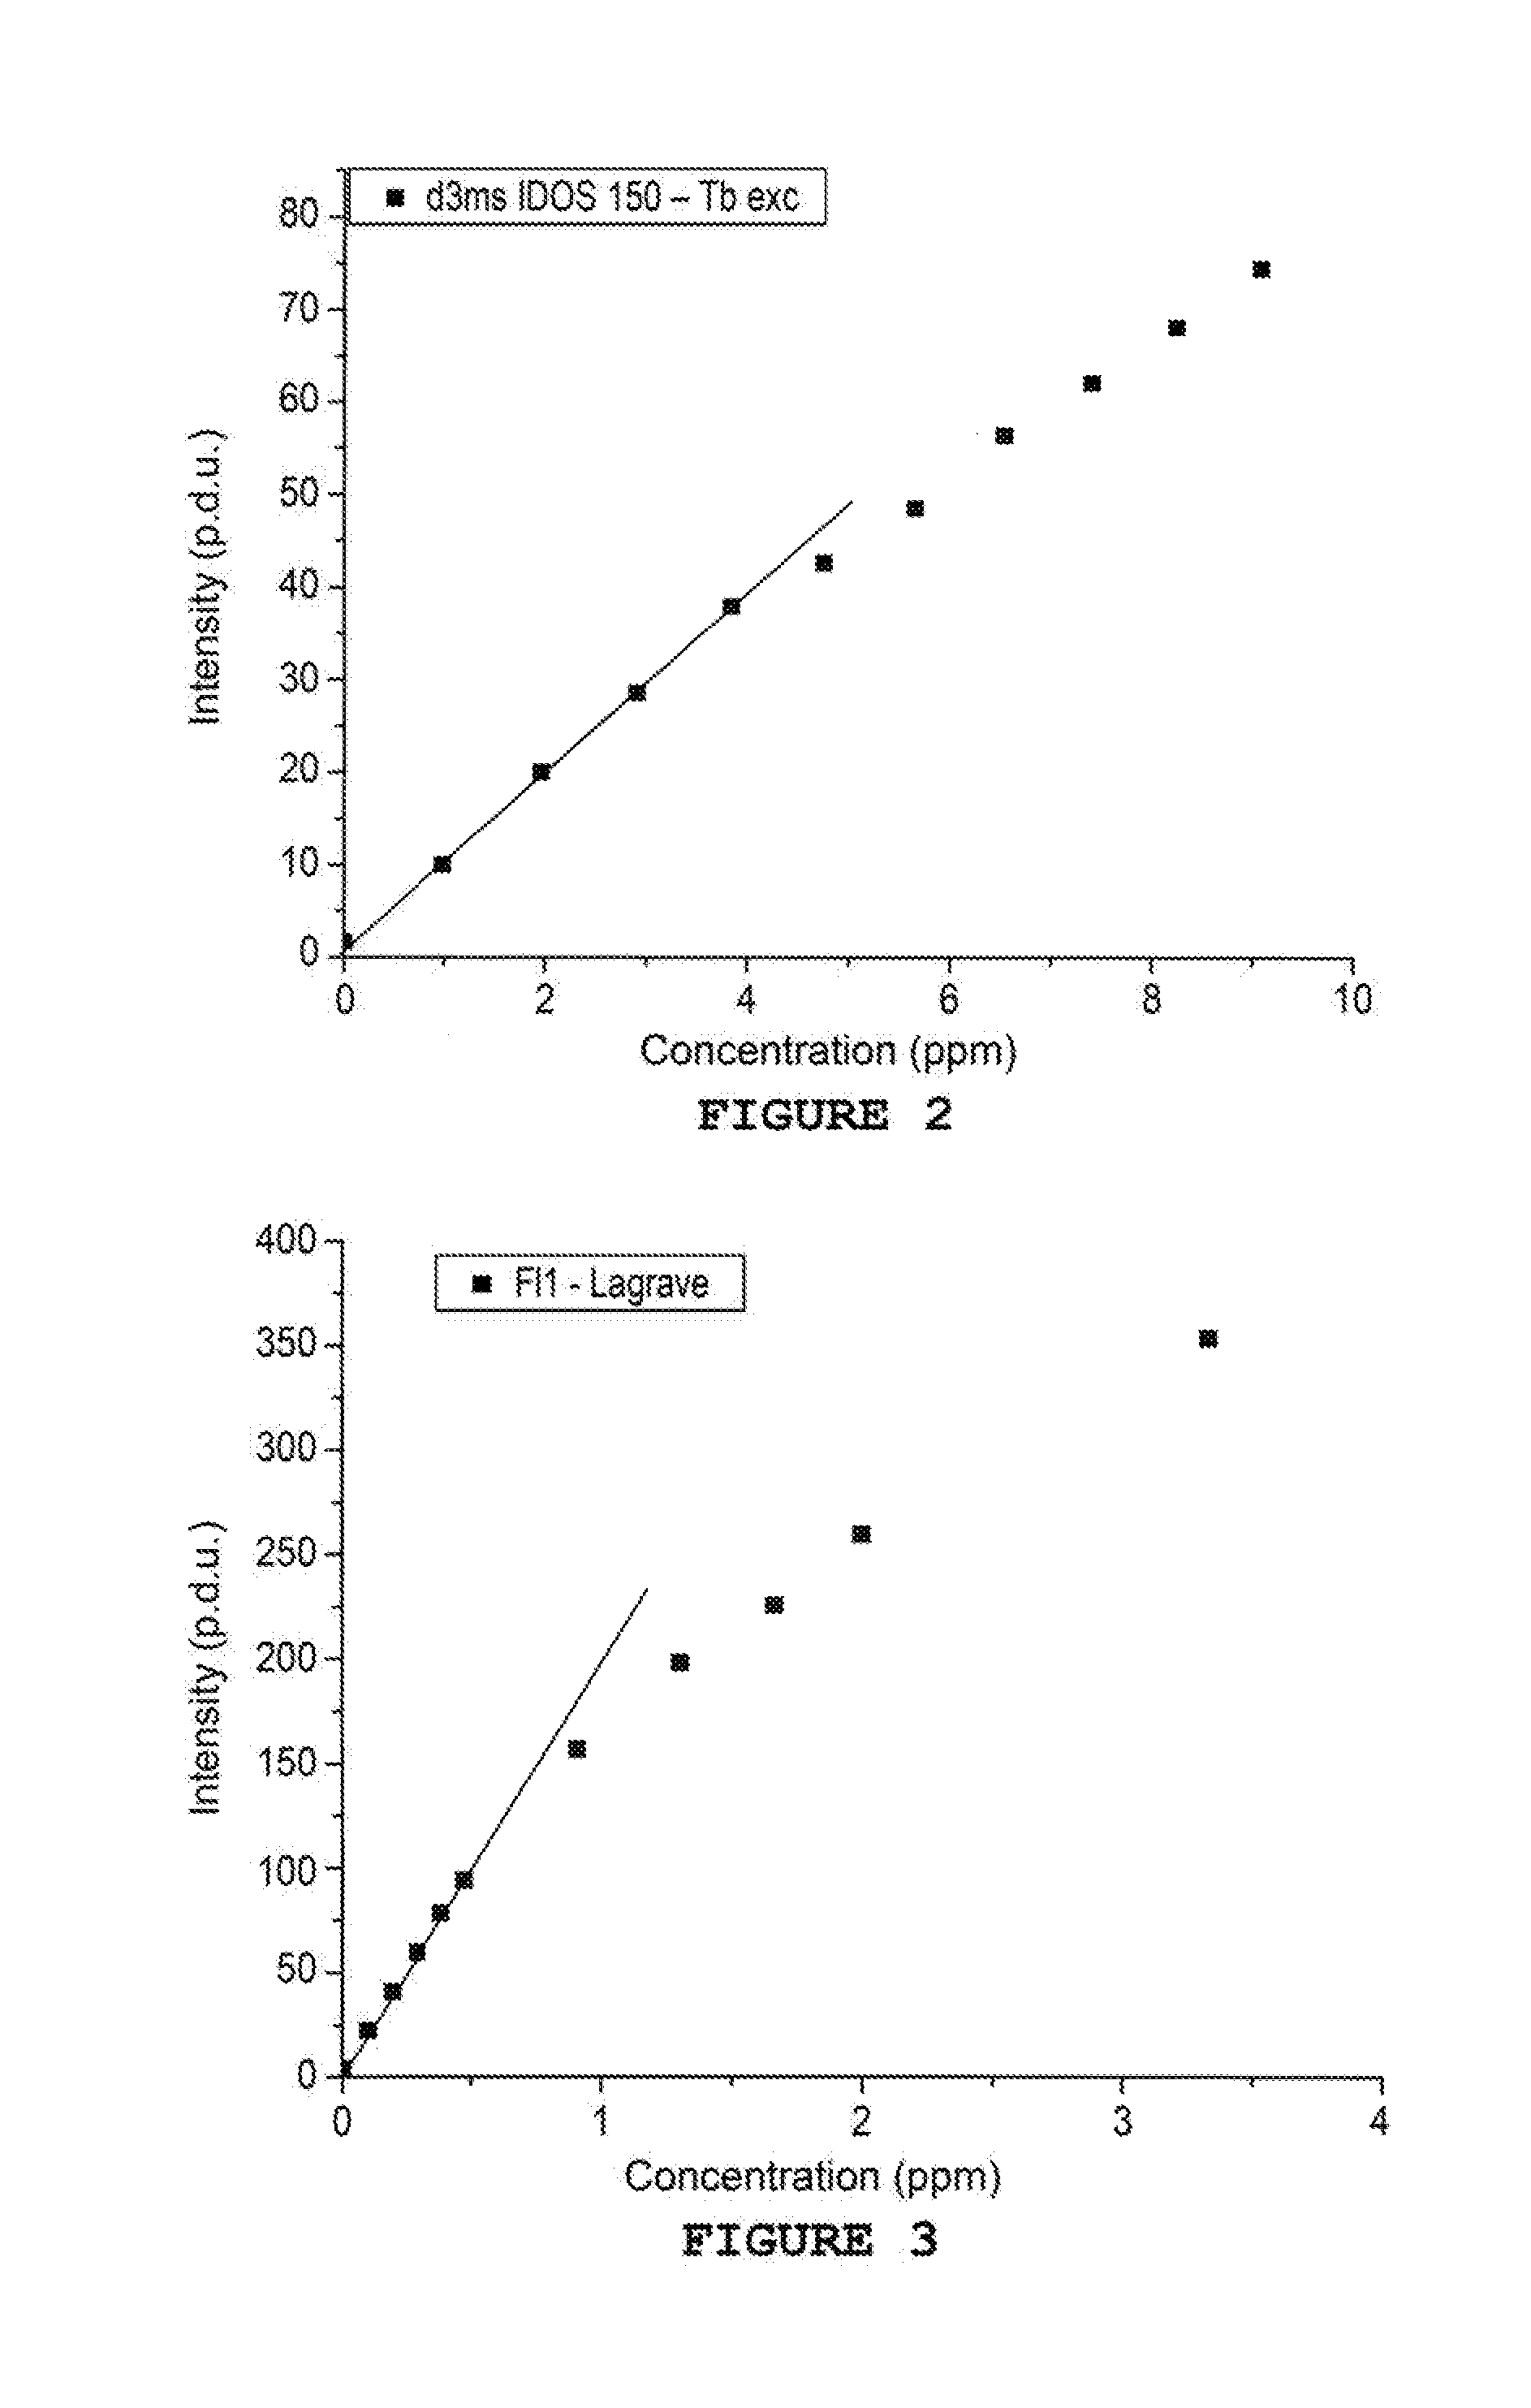 Method for adjusting the level of inhibitors in an oil or gas well